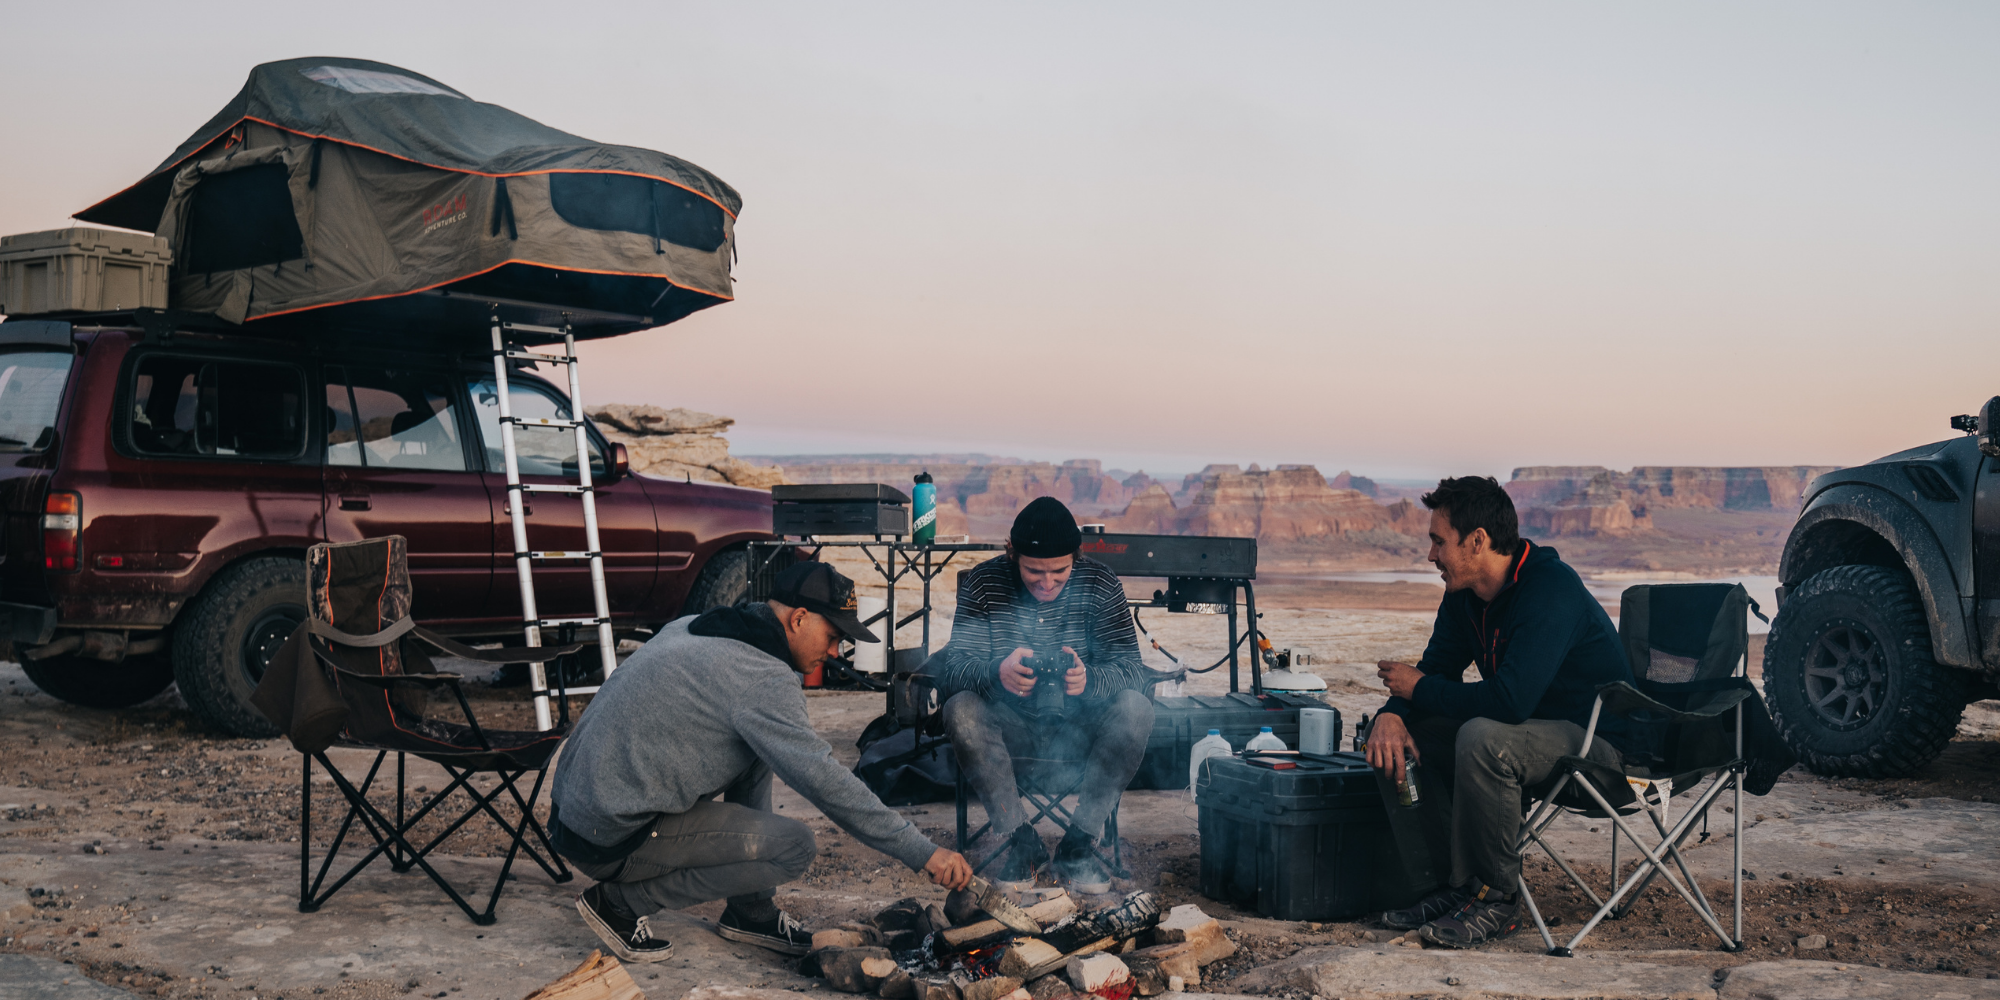 Top 5 Free Places To Roof Top Tent in Moab